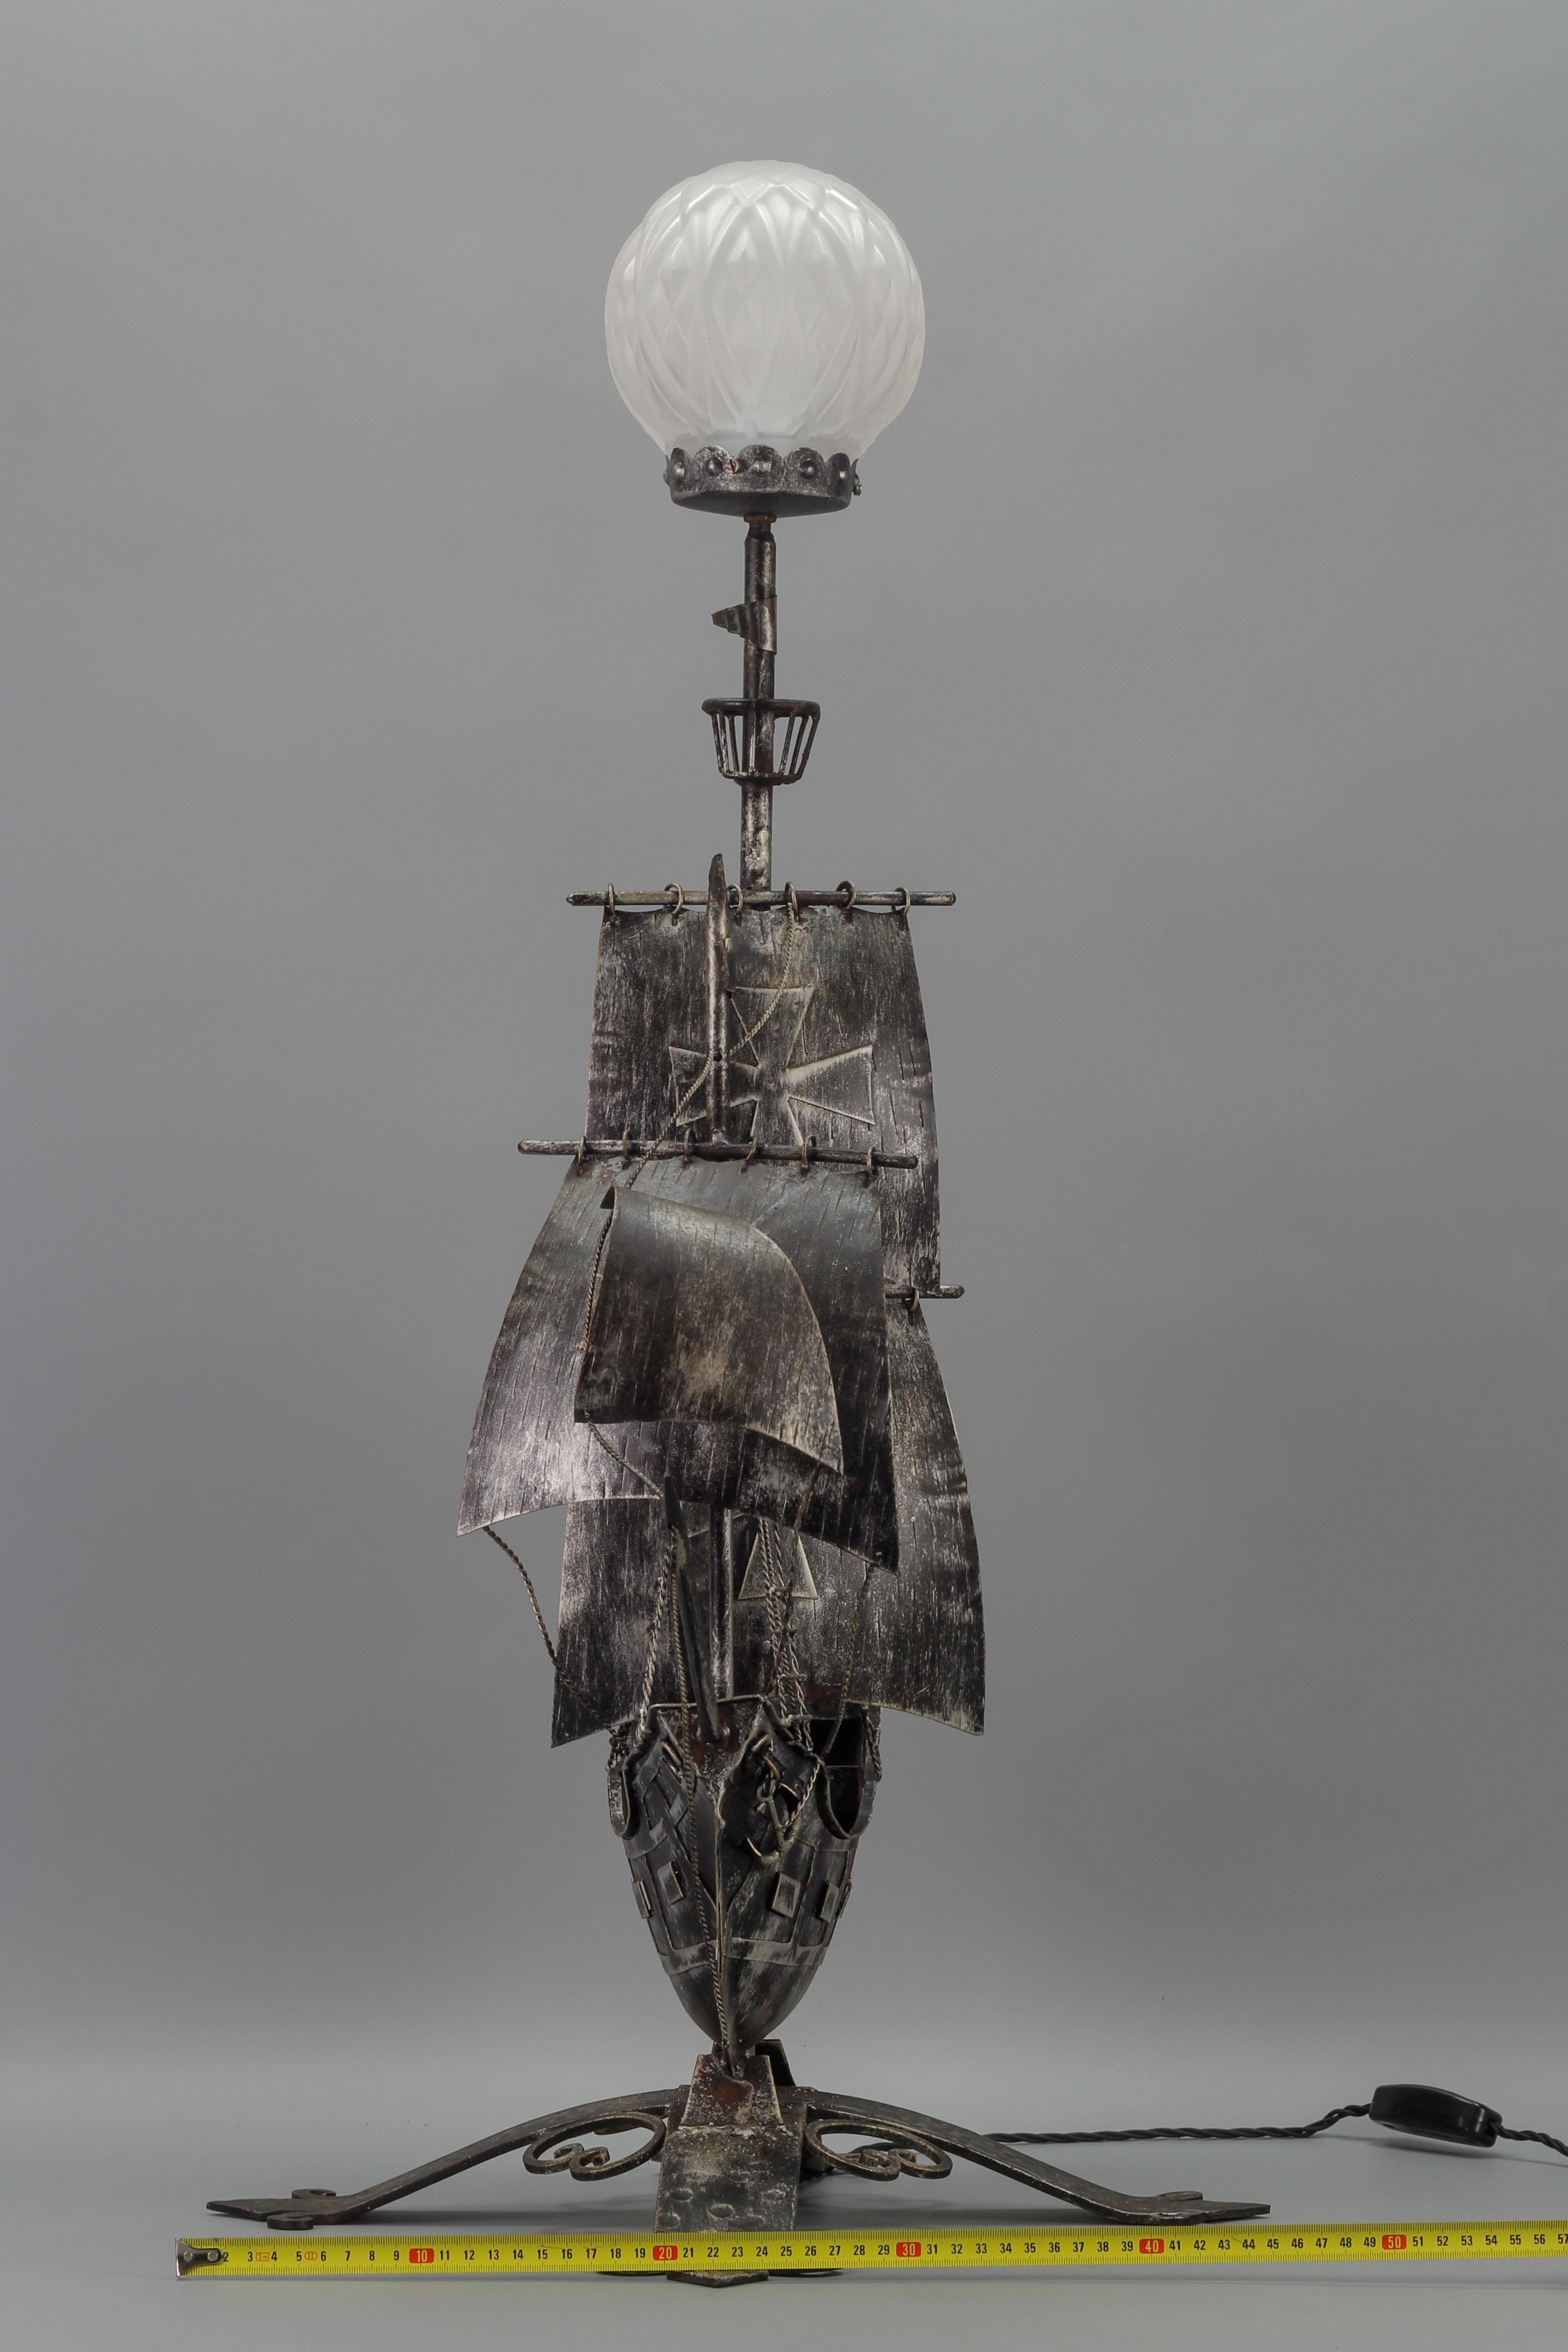 Wrought Iron and Glass Spanish Galleon Sailing Ship Shaped Floor Lamp, 1950s For Sale 2